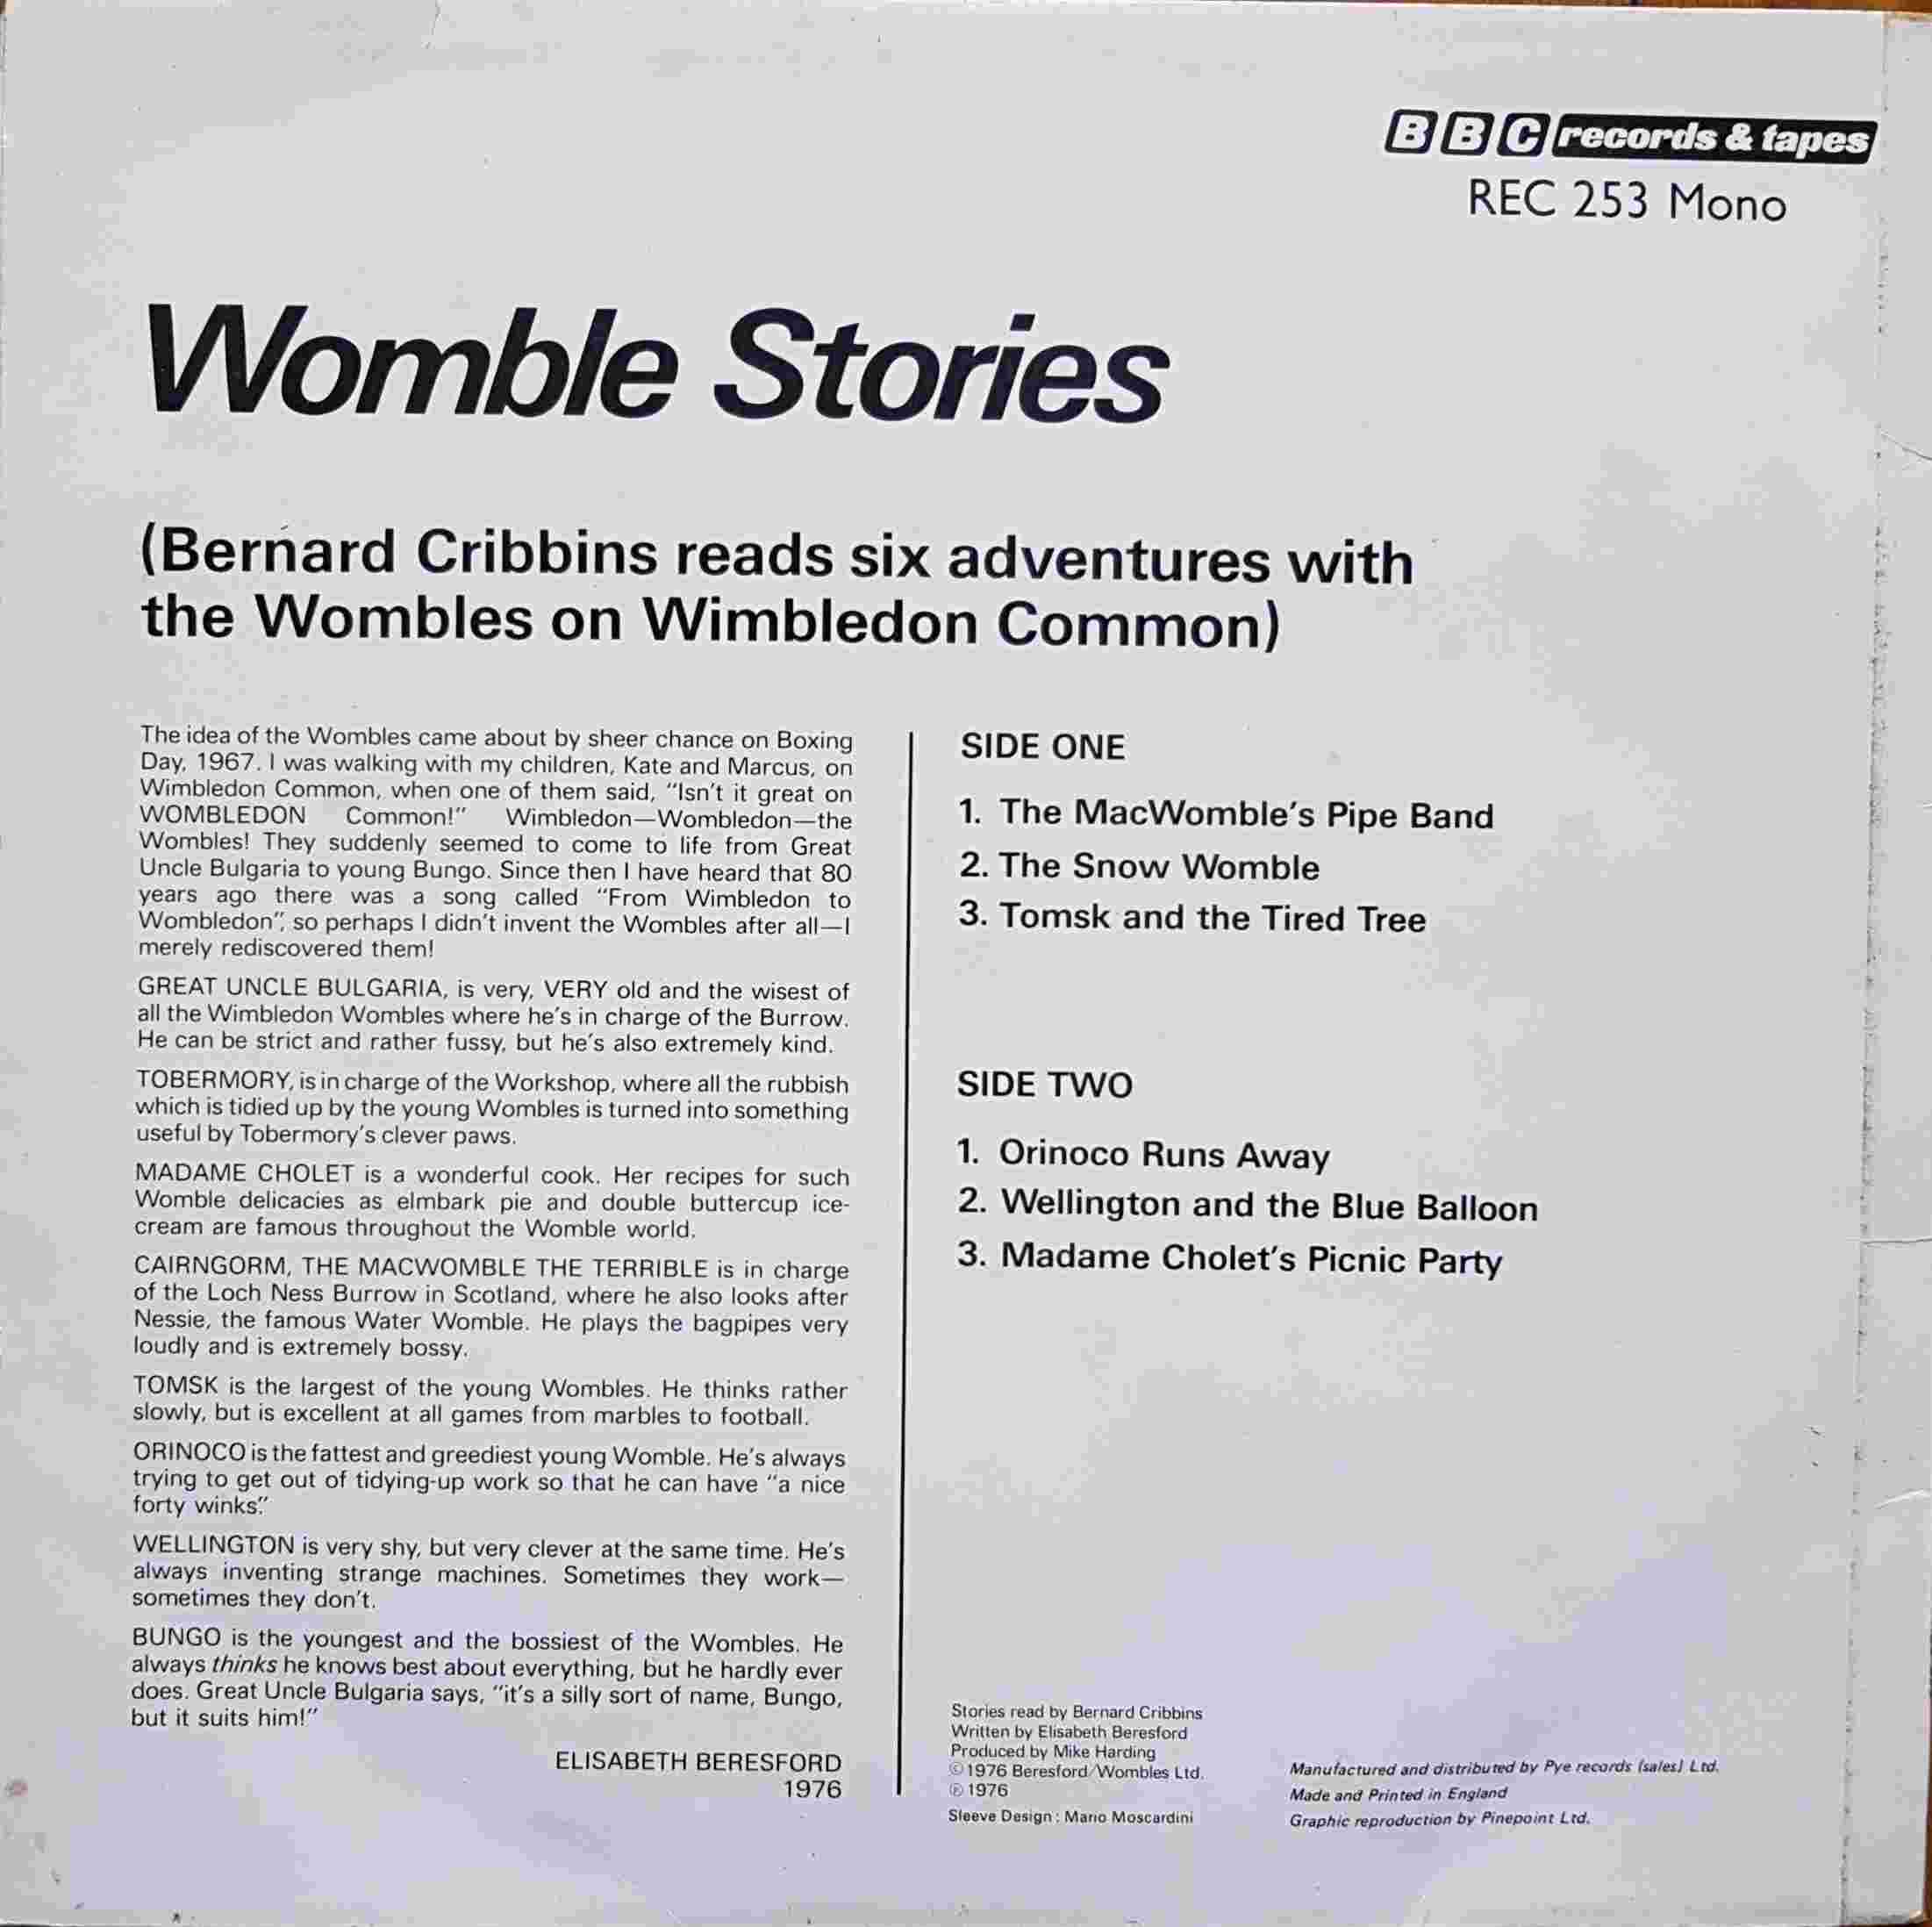 Picture of REC 253 Womble Stories by artist Bernard Cribbins from the BBC records and Tapes library